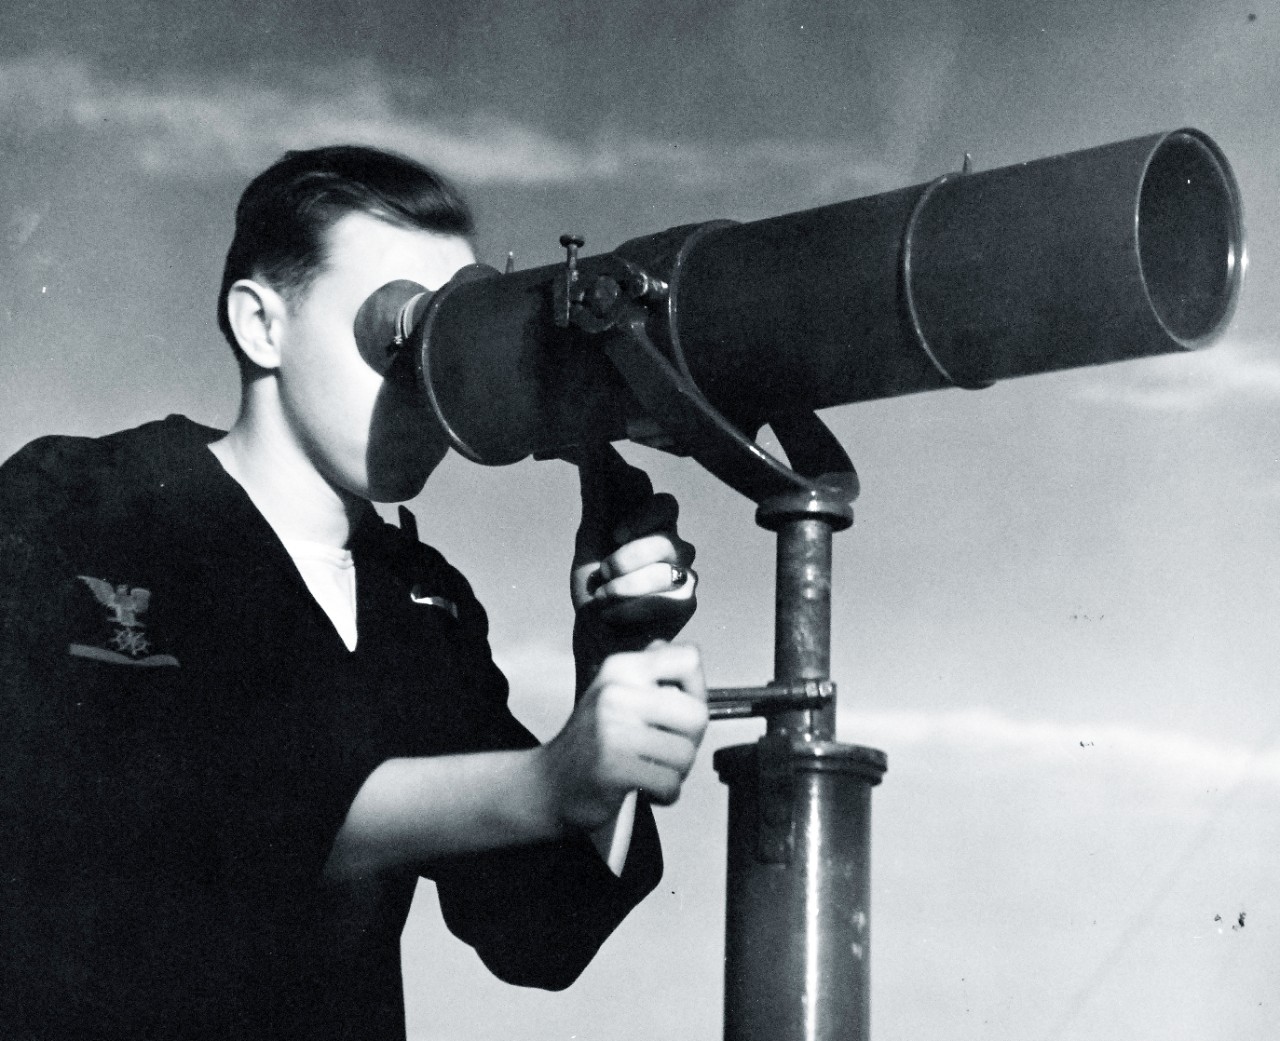 80-G-279758:   U.S. Naval Air Station, Kodiak, Alaska, 1943.      Powerful telescope mounted atop control tower at helps to identify distant vessels and blinker messages.  Photograph released October 21, 1943.  U.S. Navy Photograph now in the collections of the National Archives.  (2016/01/19).